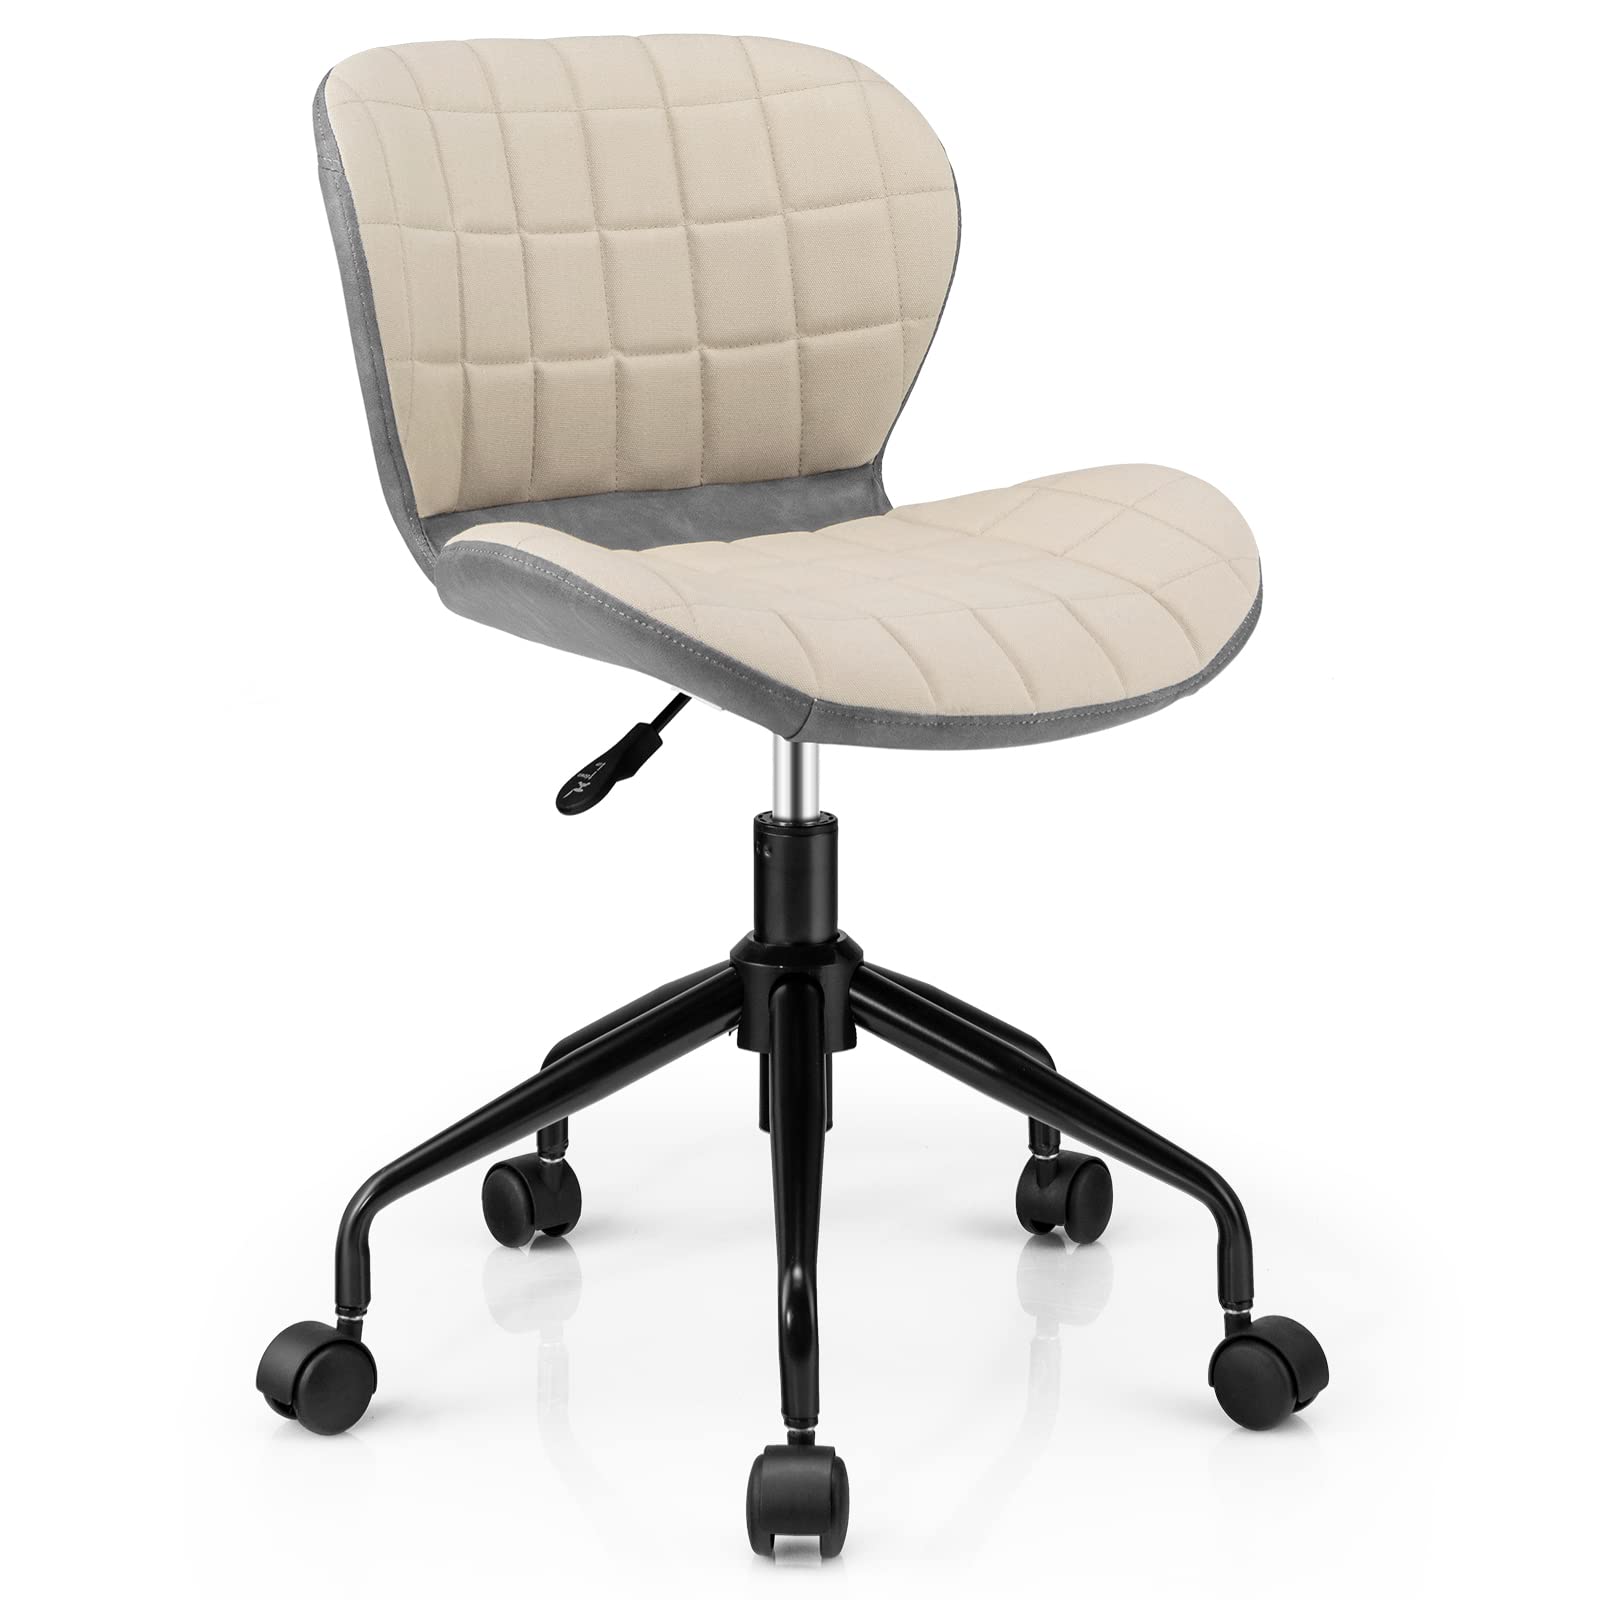 Giantex Ergonomic Home Office Desk Chair, Mid-Century Office Chair w/PU Leather & Fabric, Upholstery Computer Chair